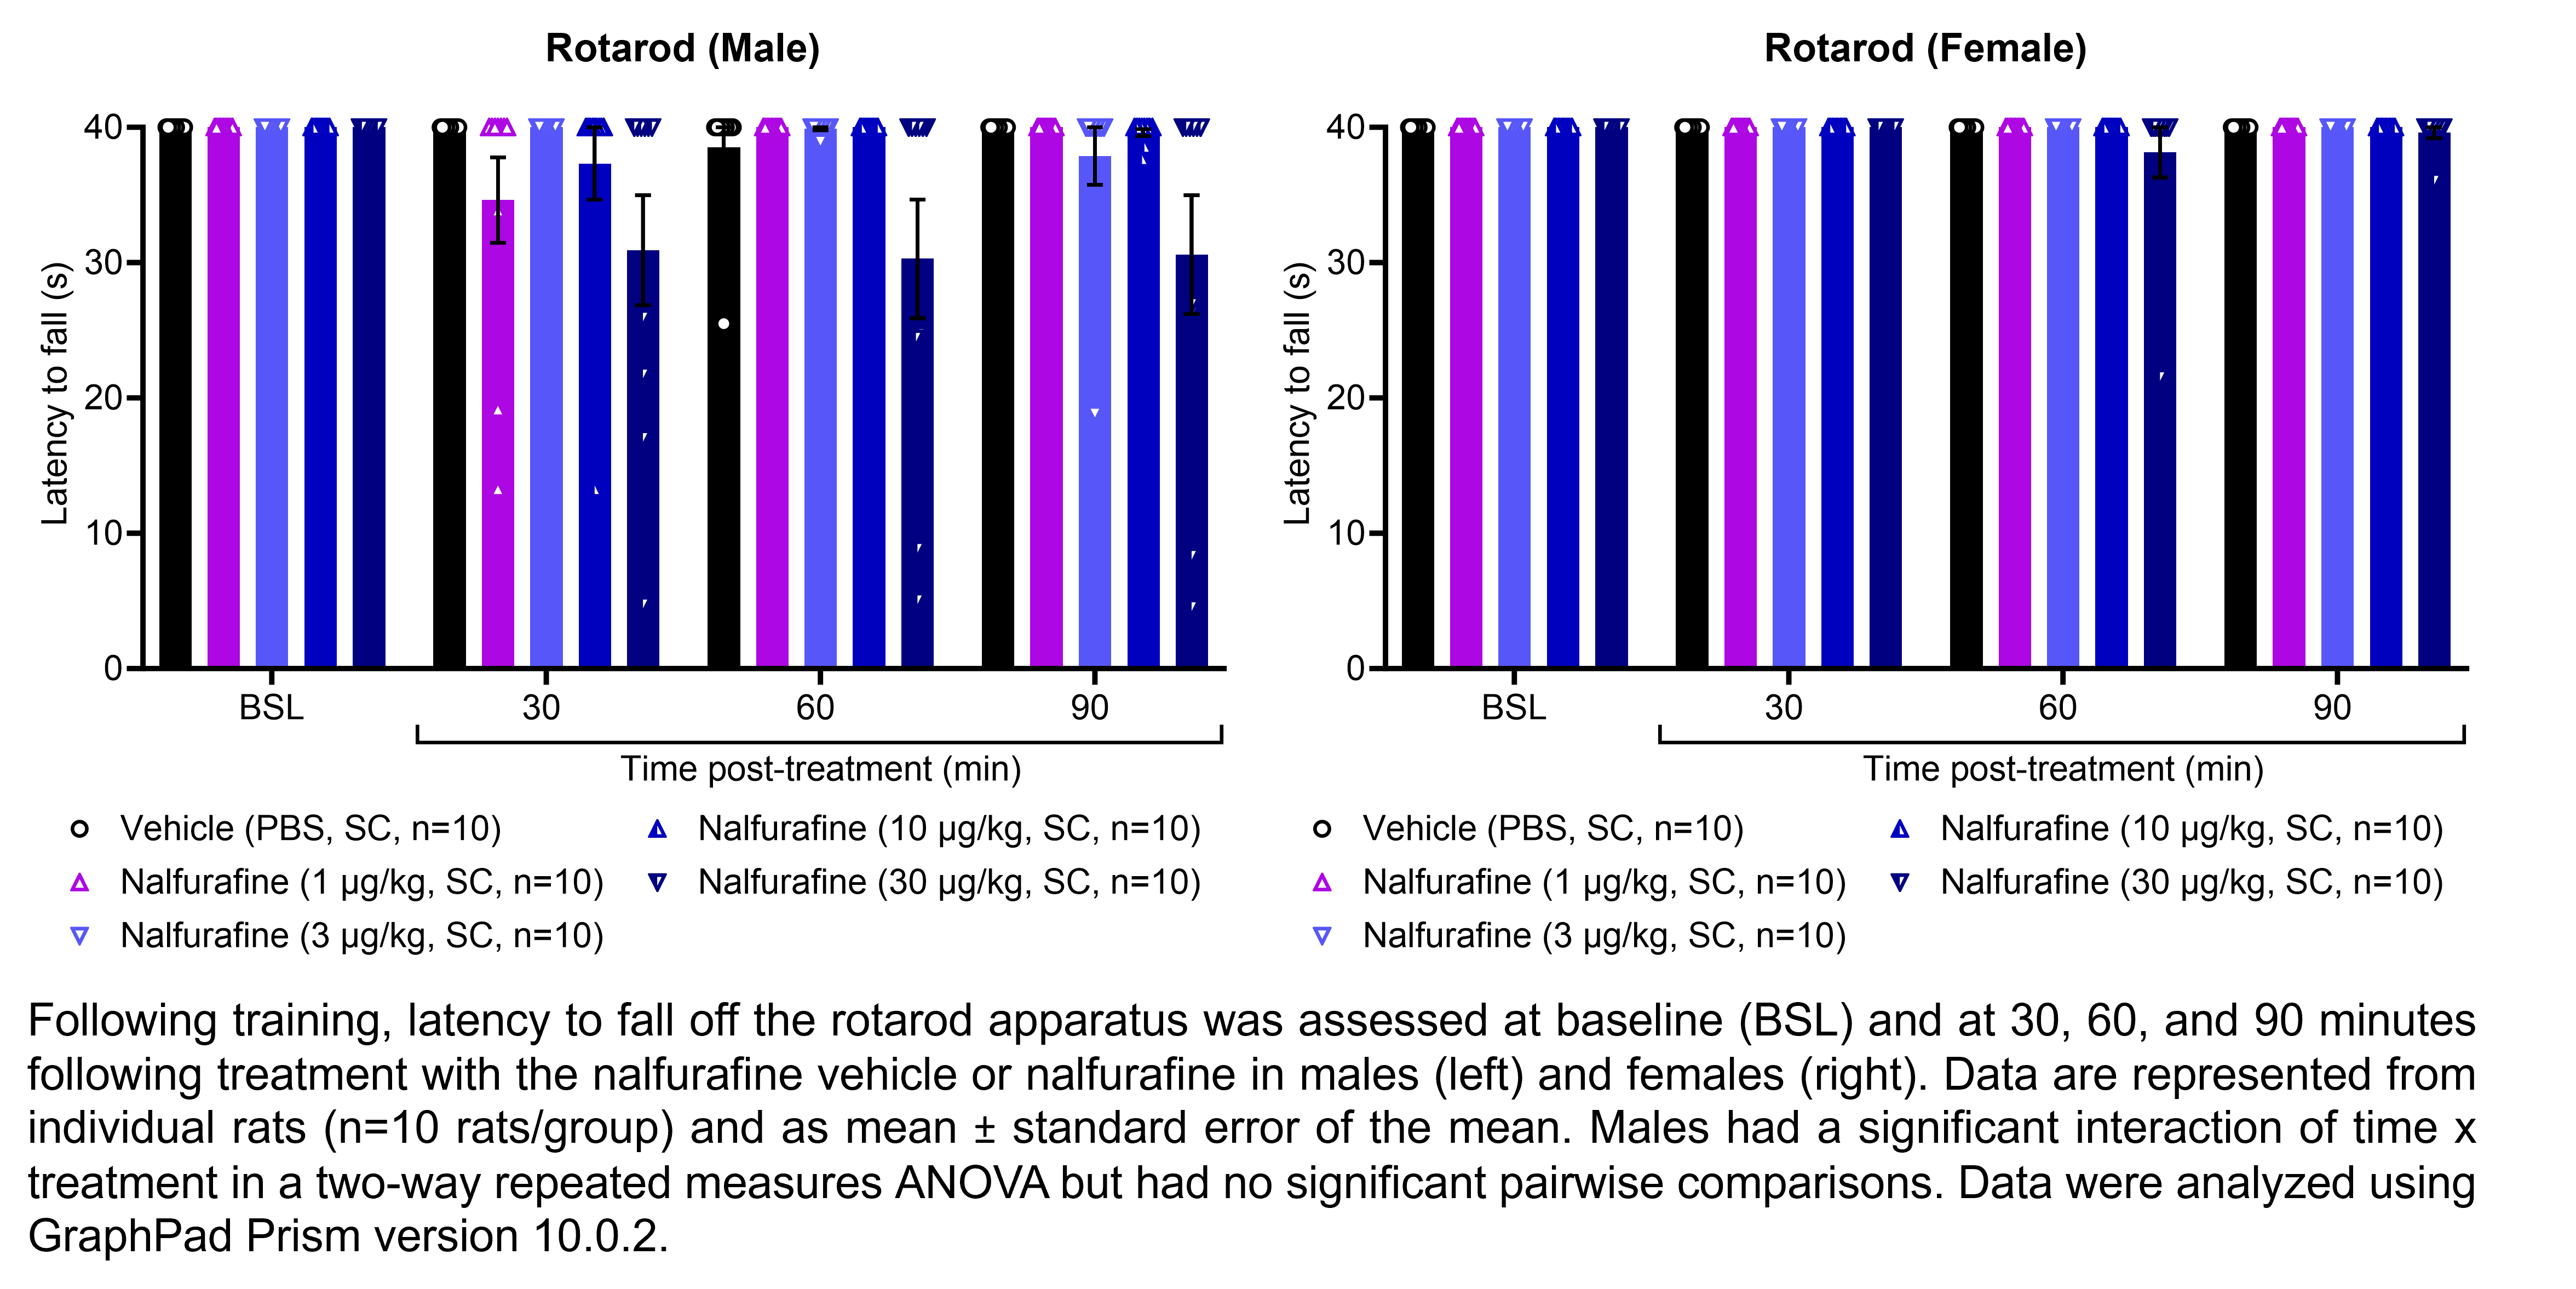 Two graphs show the latency for male or female rats to fall off a rotarod apparatus. Responses are shown at the following time points: baseline (before treatment) and at 30, 60, and 90 minutes after treatment with vehicle (phosphate buffered saline, delivered SC) or nalfurafine (1, 3, 10, or 30 μg/kg, delivered SC). There were 10 rats per group. Males but not females had a significant interaction of time x treatment in a two-way repeated measures ANOVA. In males, the latency to fall in the 30 μg/kg nalfurafine group was approximately 30 seconds at each post-treatment time point, but this was not significantly different from the 40 second latency seen in the vehicle group. Data were analyzed using GraphPad Prism version 10.0.2.